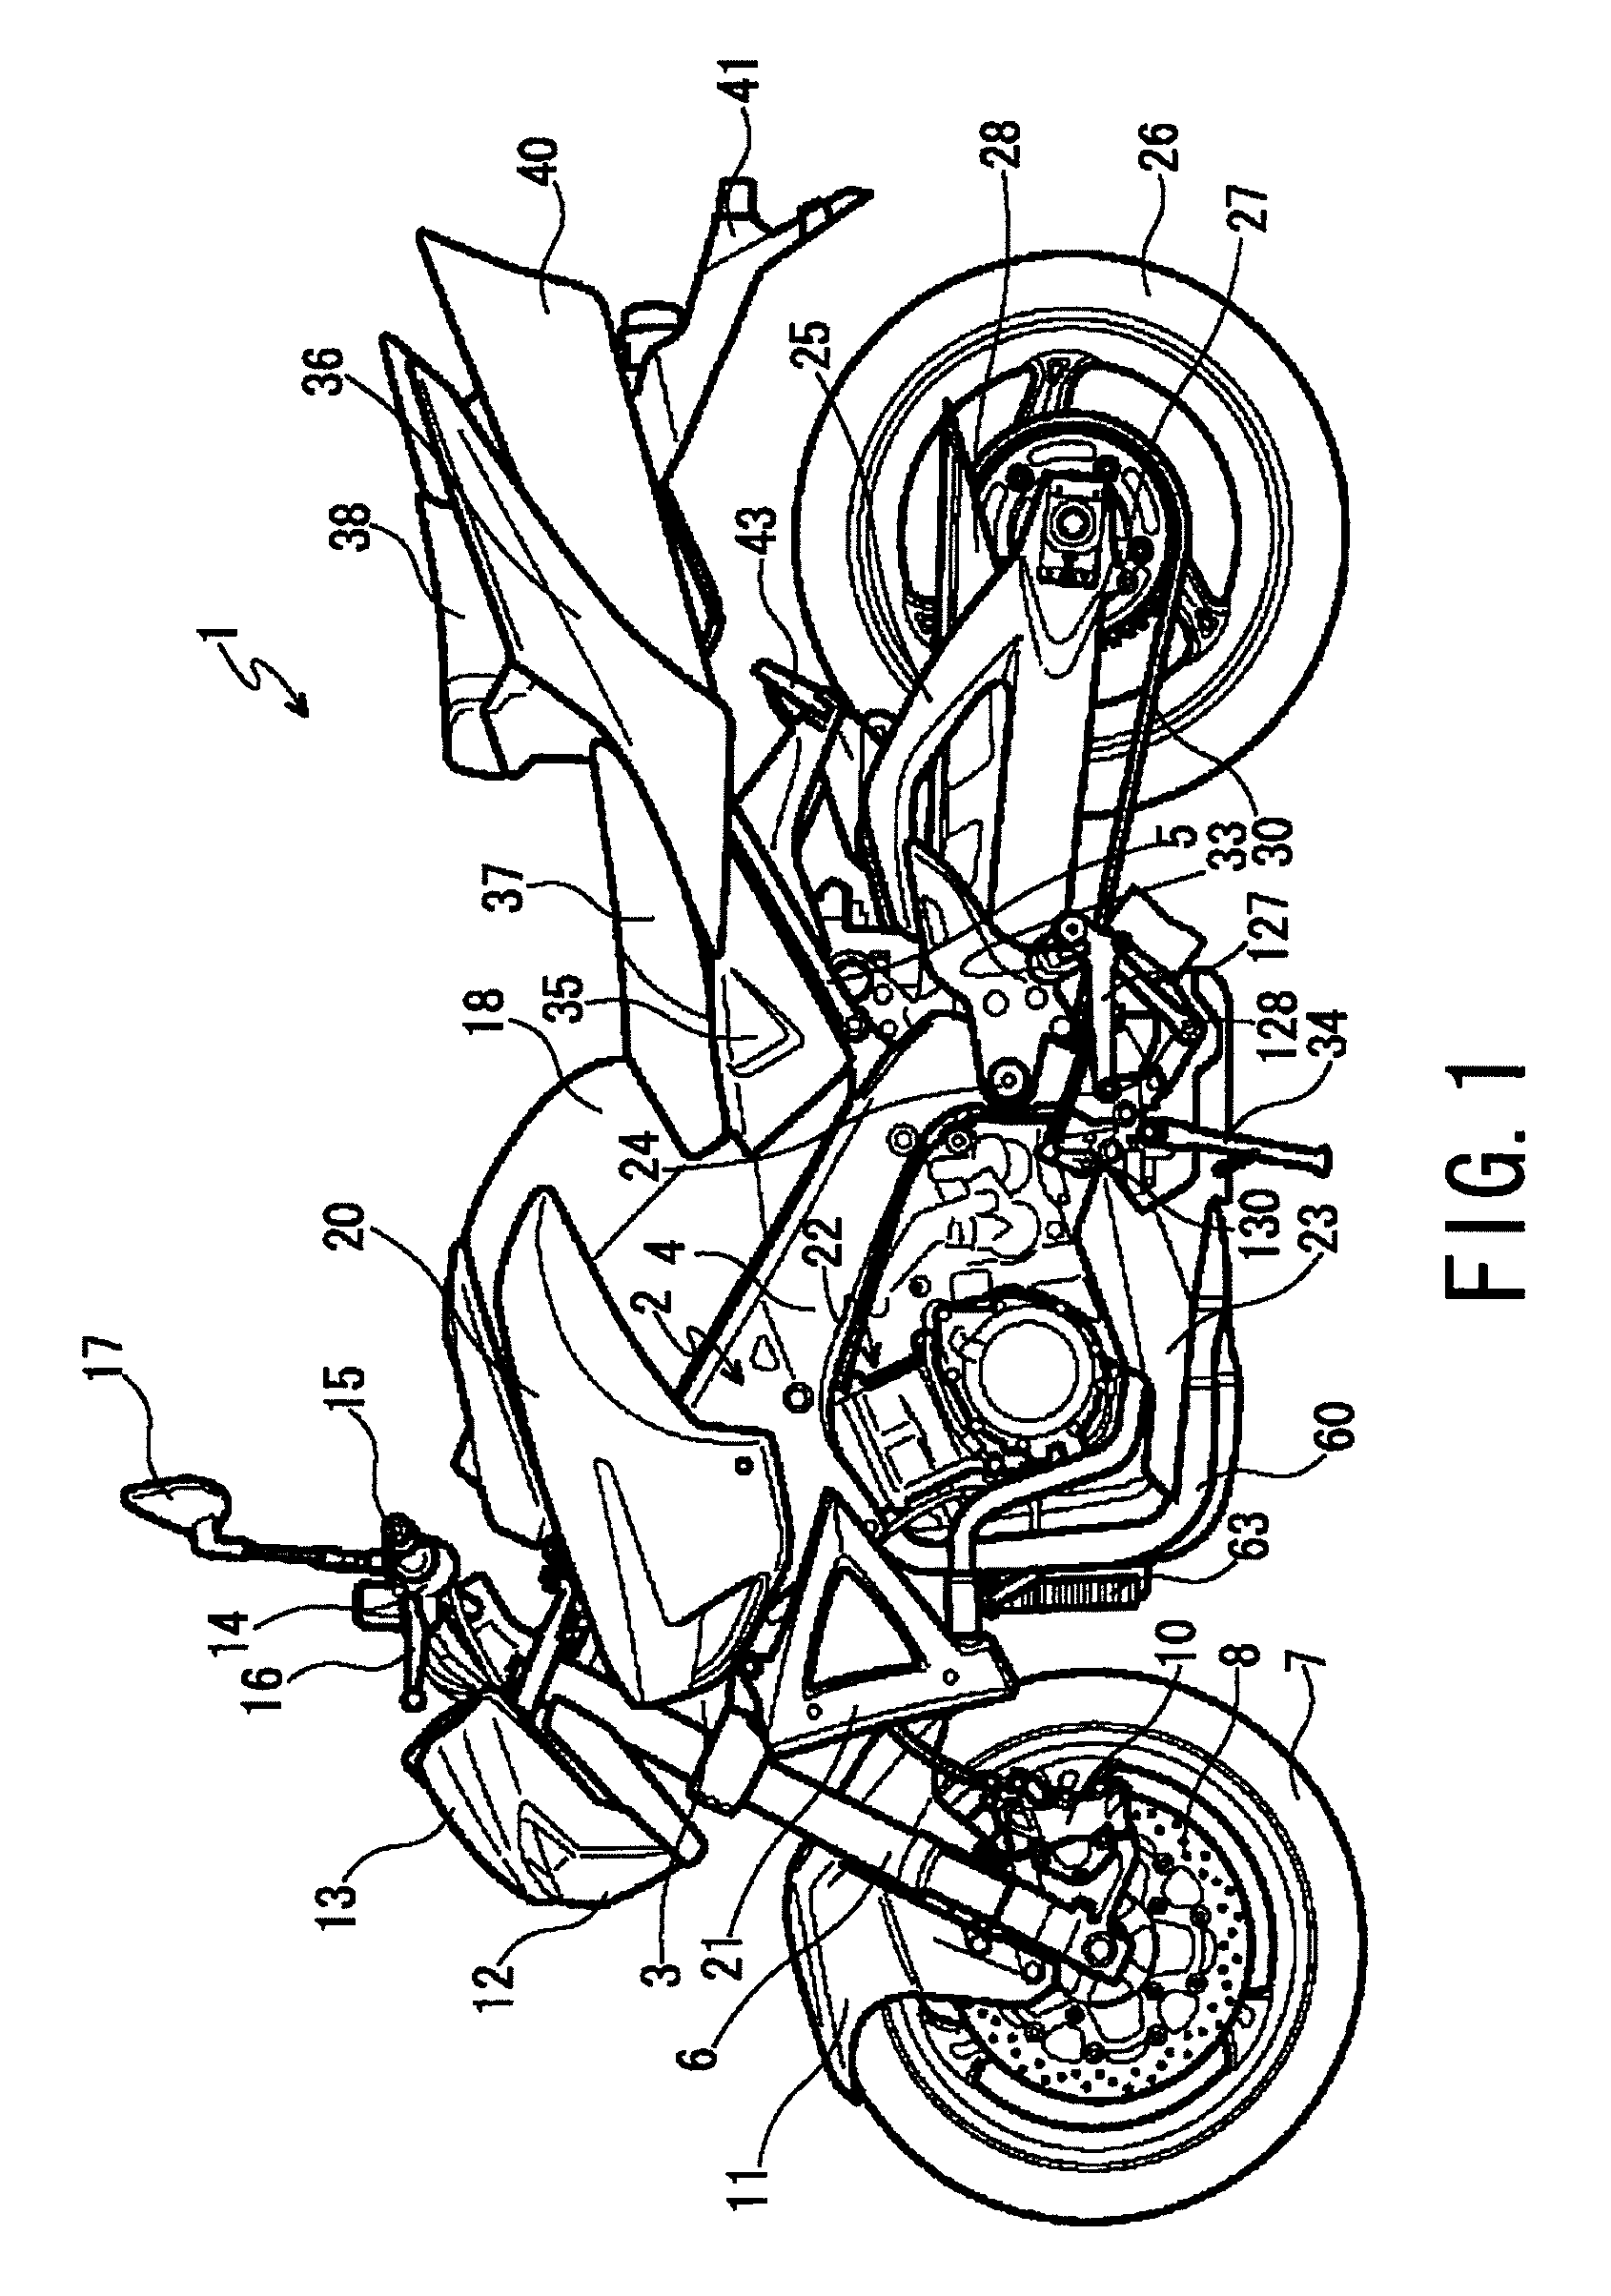 Transmission of motorcycle